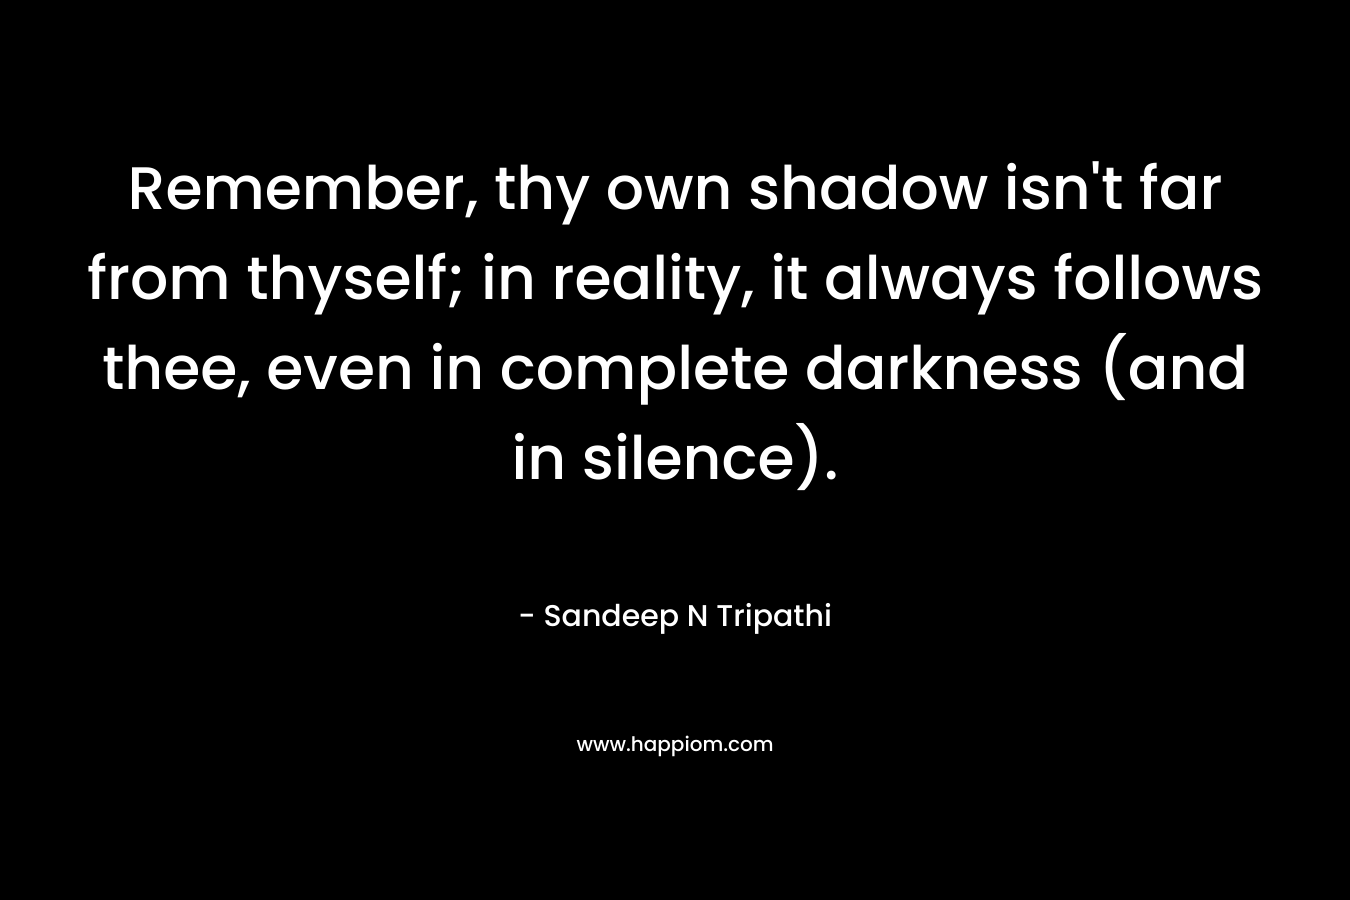 Remember, thy own shadow isn’t far from thyself; in reality, it always follows thee, even in complete darkness (and in silence). – Sandeep N Tripathi